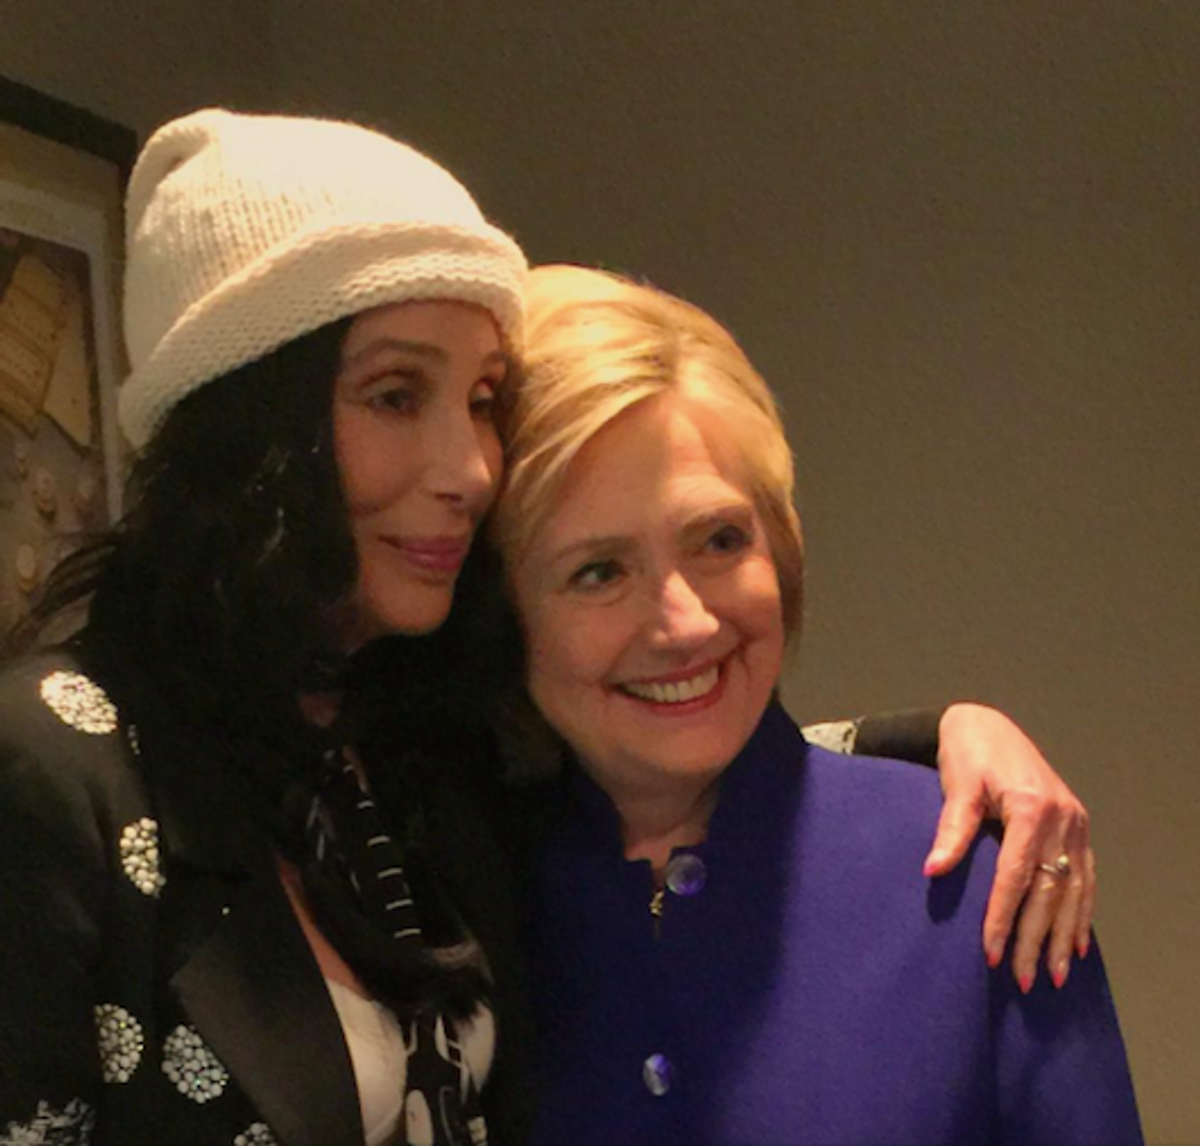 Cher and Hillary Clinton 